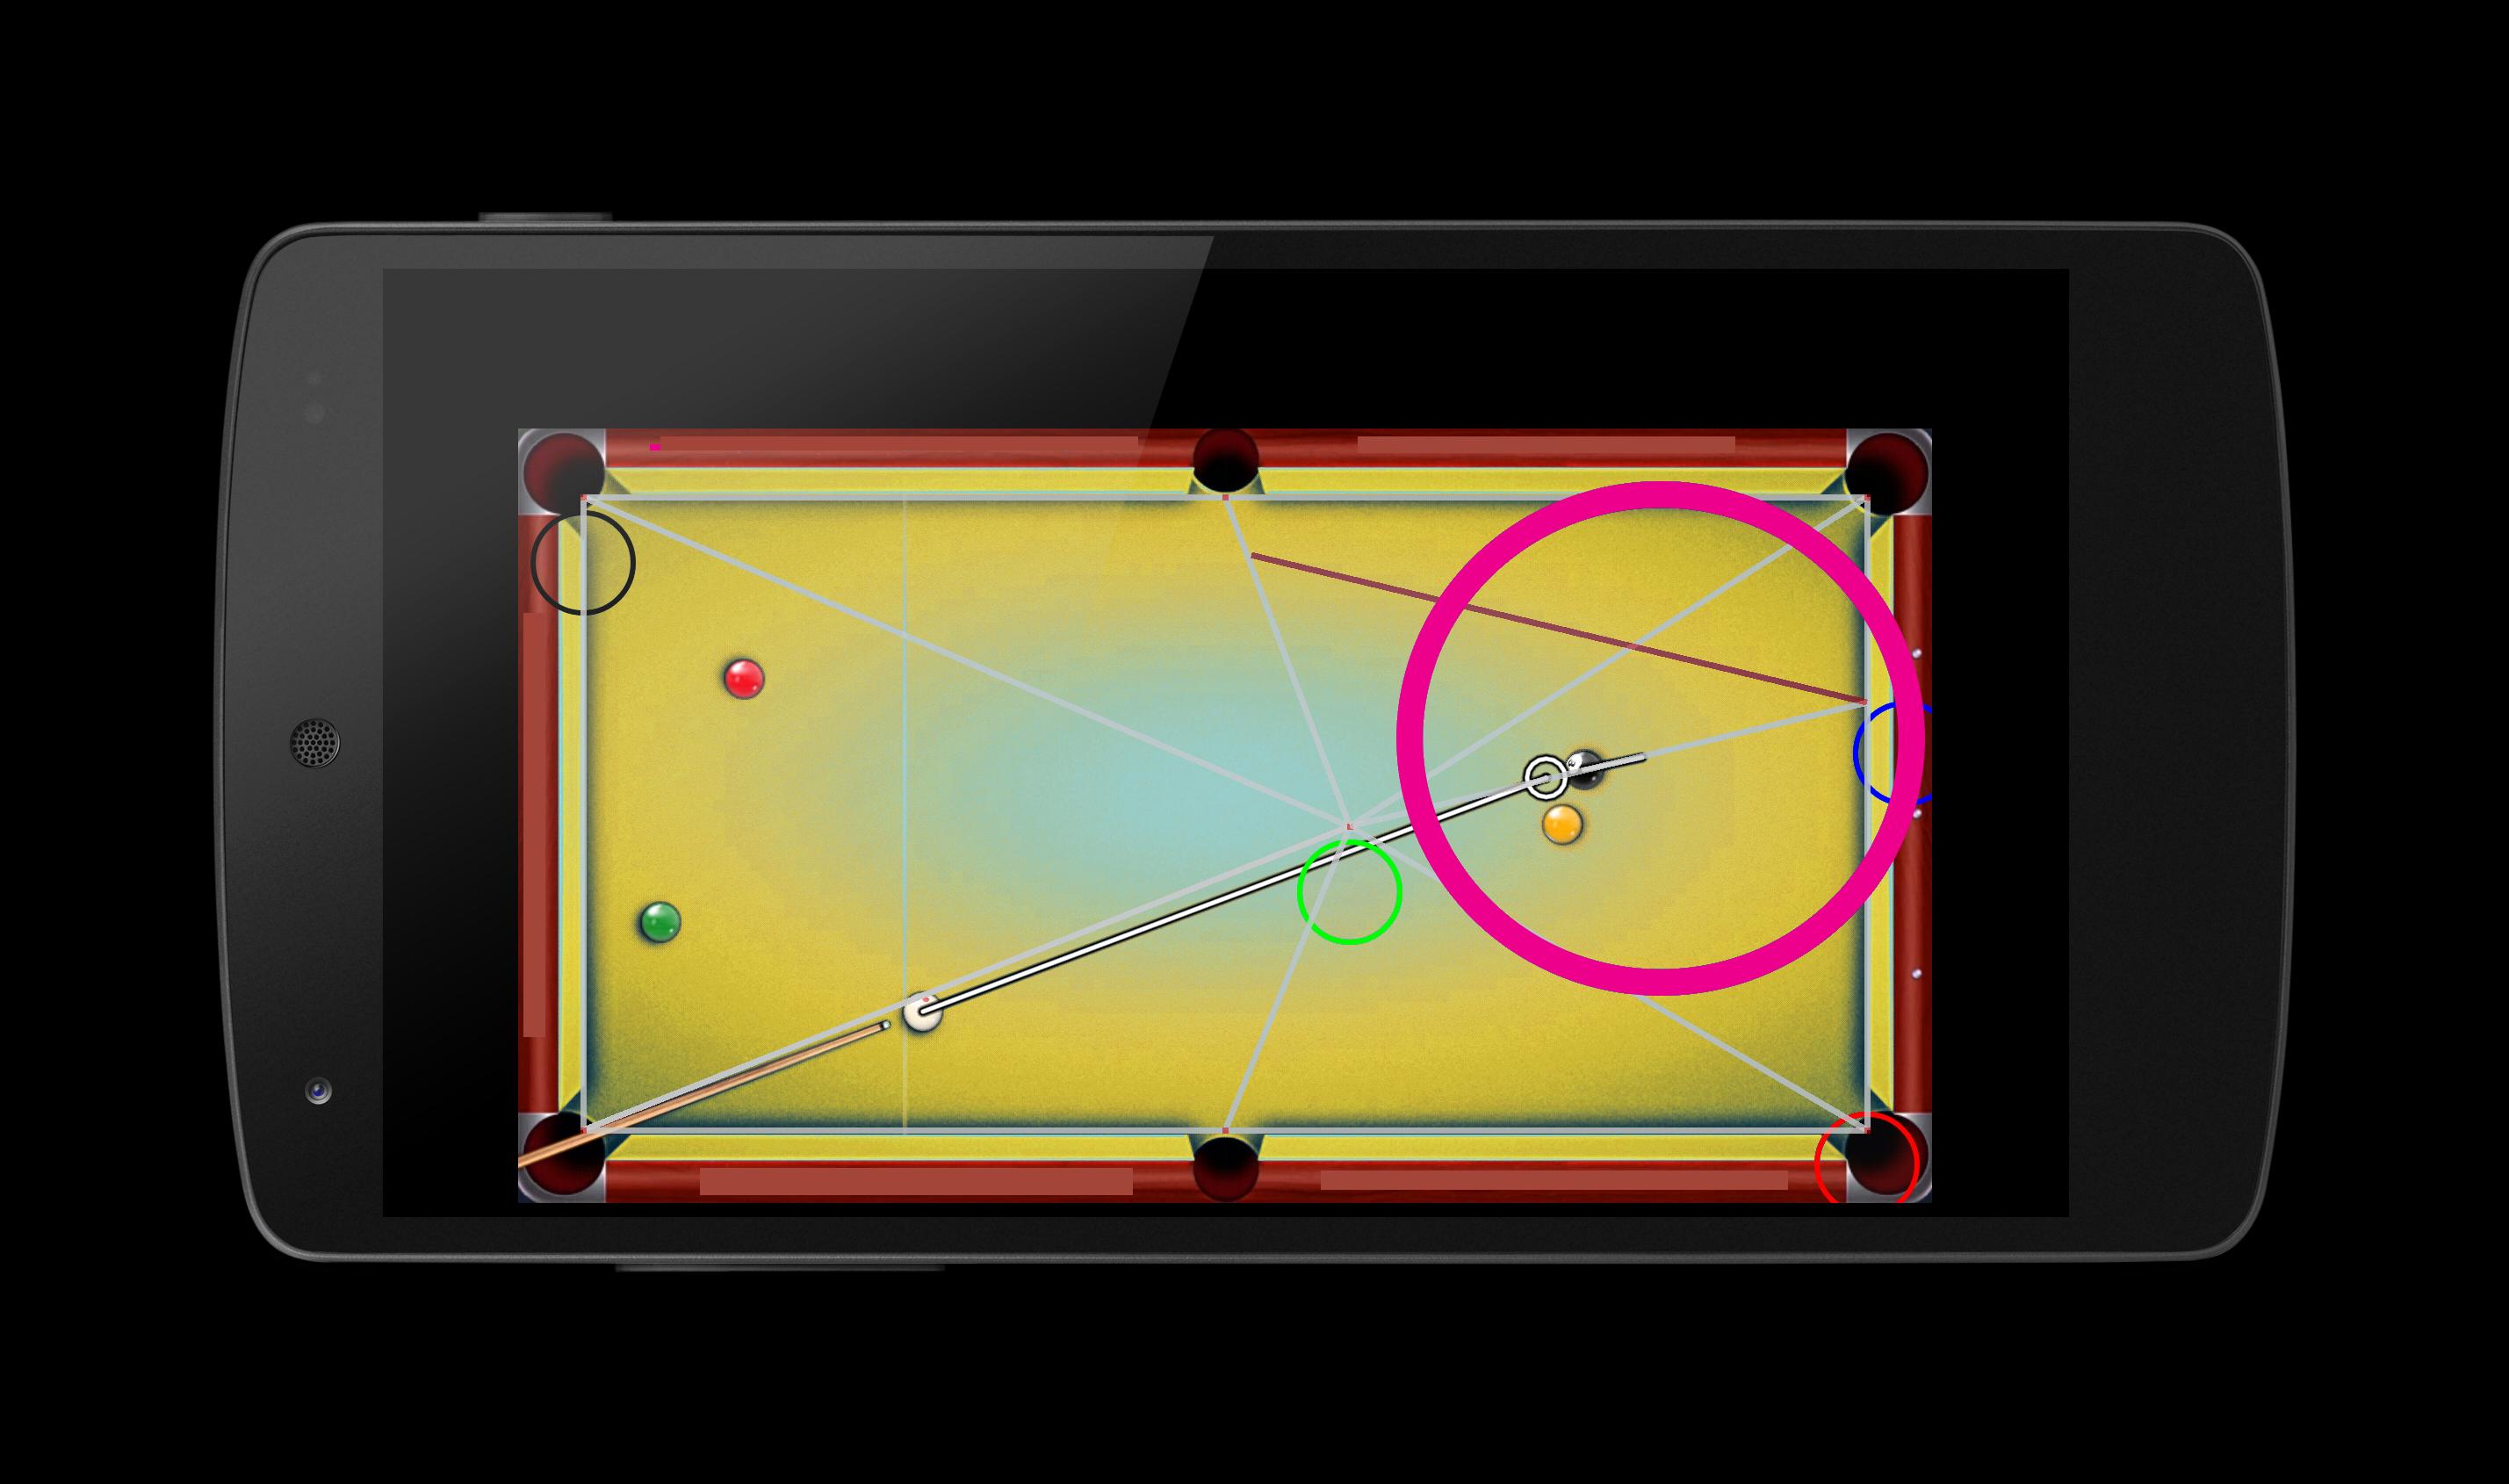 8 Ball Tool Lite for Android - APK Download - 